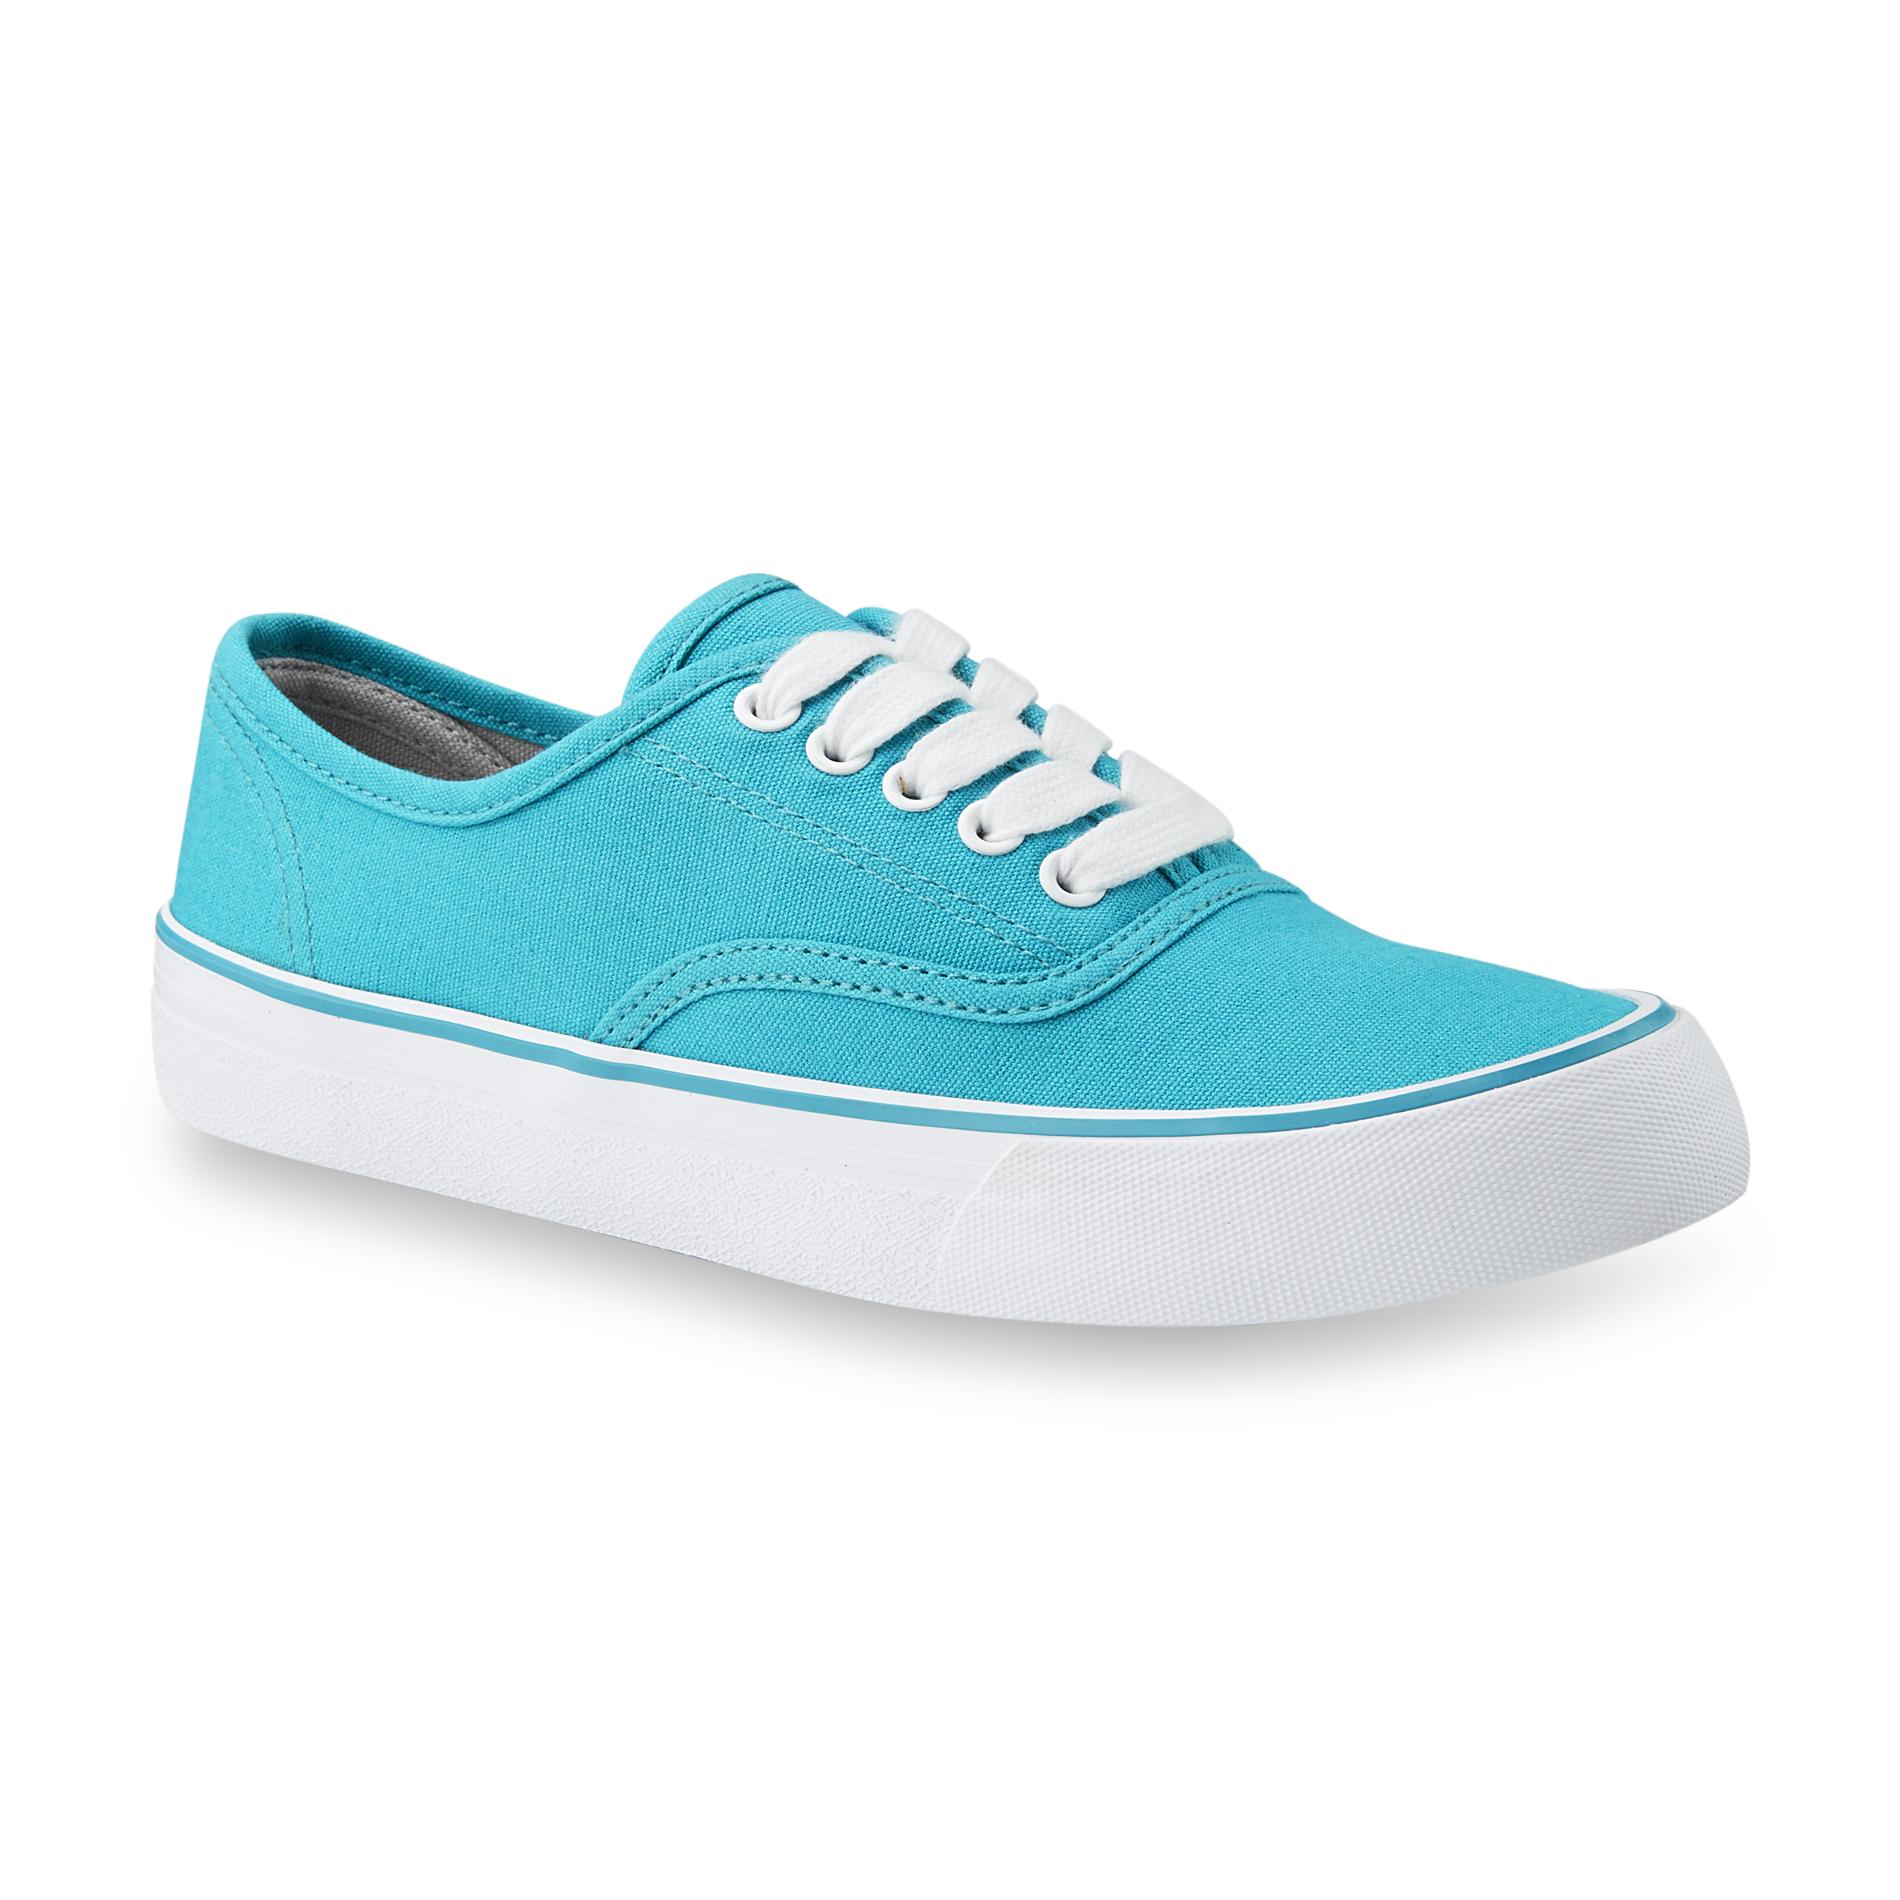 Womens Teal Shoes | Kmart.com | Ladies Teal Shoes, Female Teal Shoes